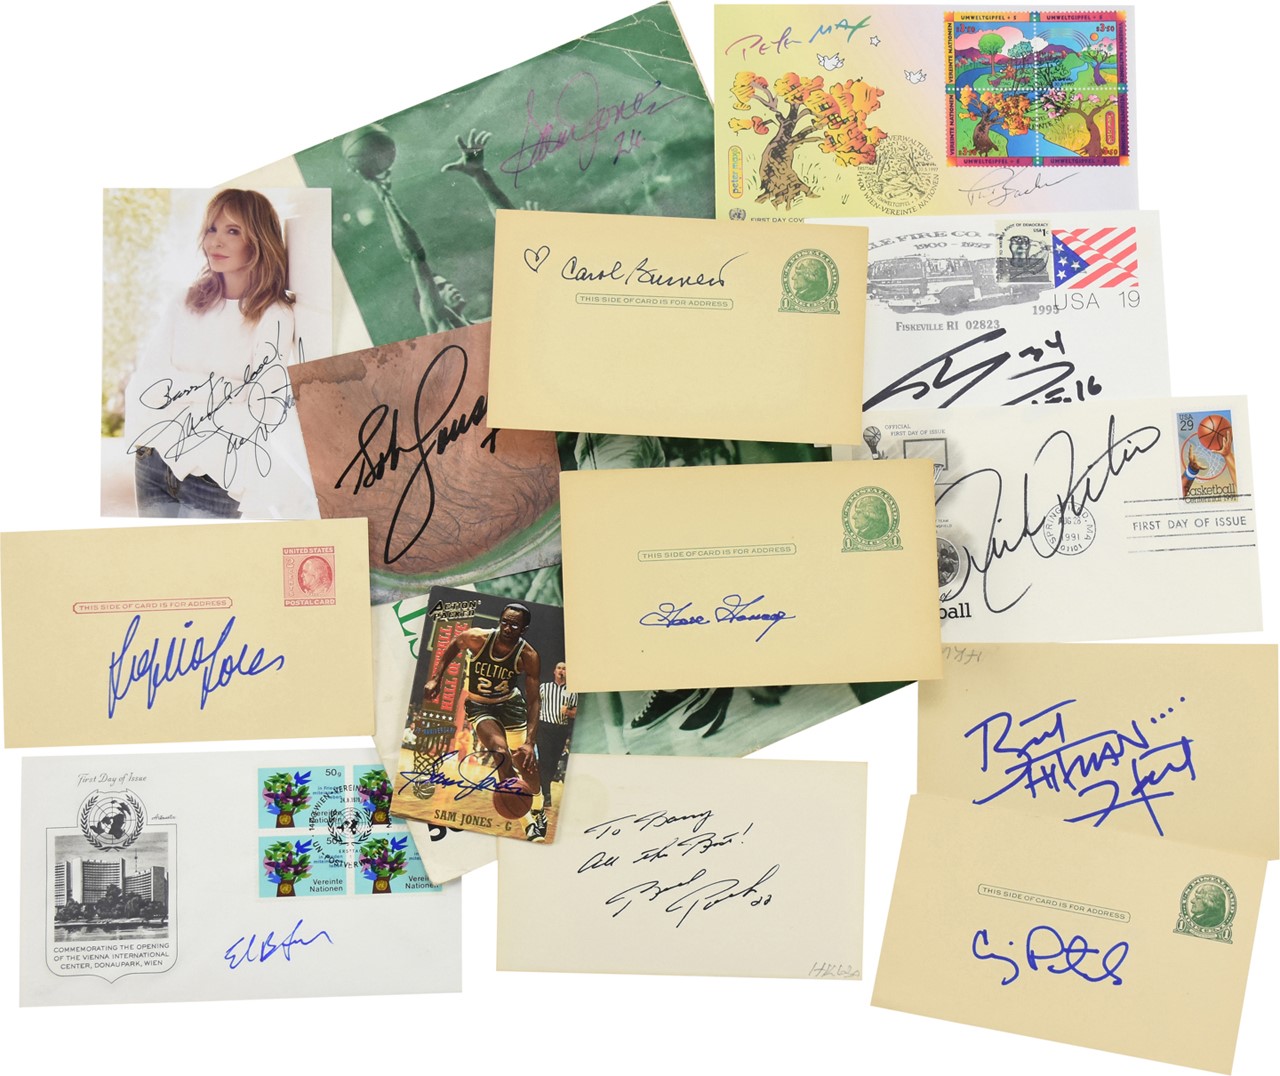 Baseball Autographs - Multi-Sport and Entertainment Autograph Archive with Hall of Famers (500+)